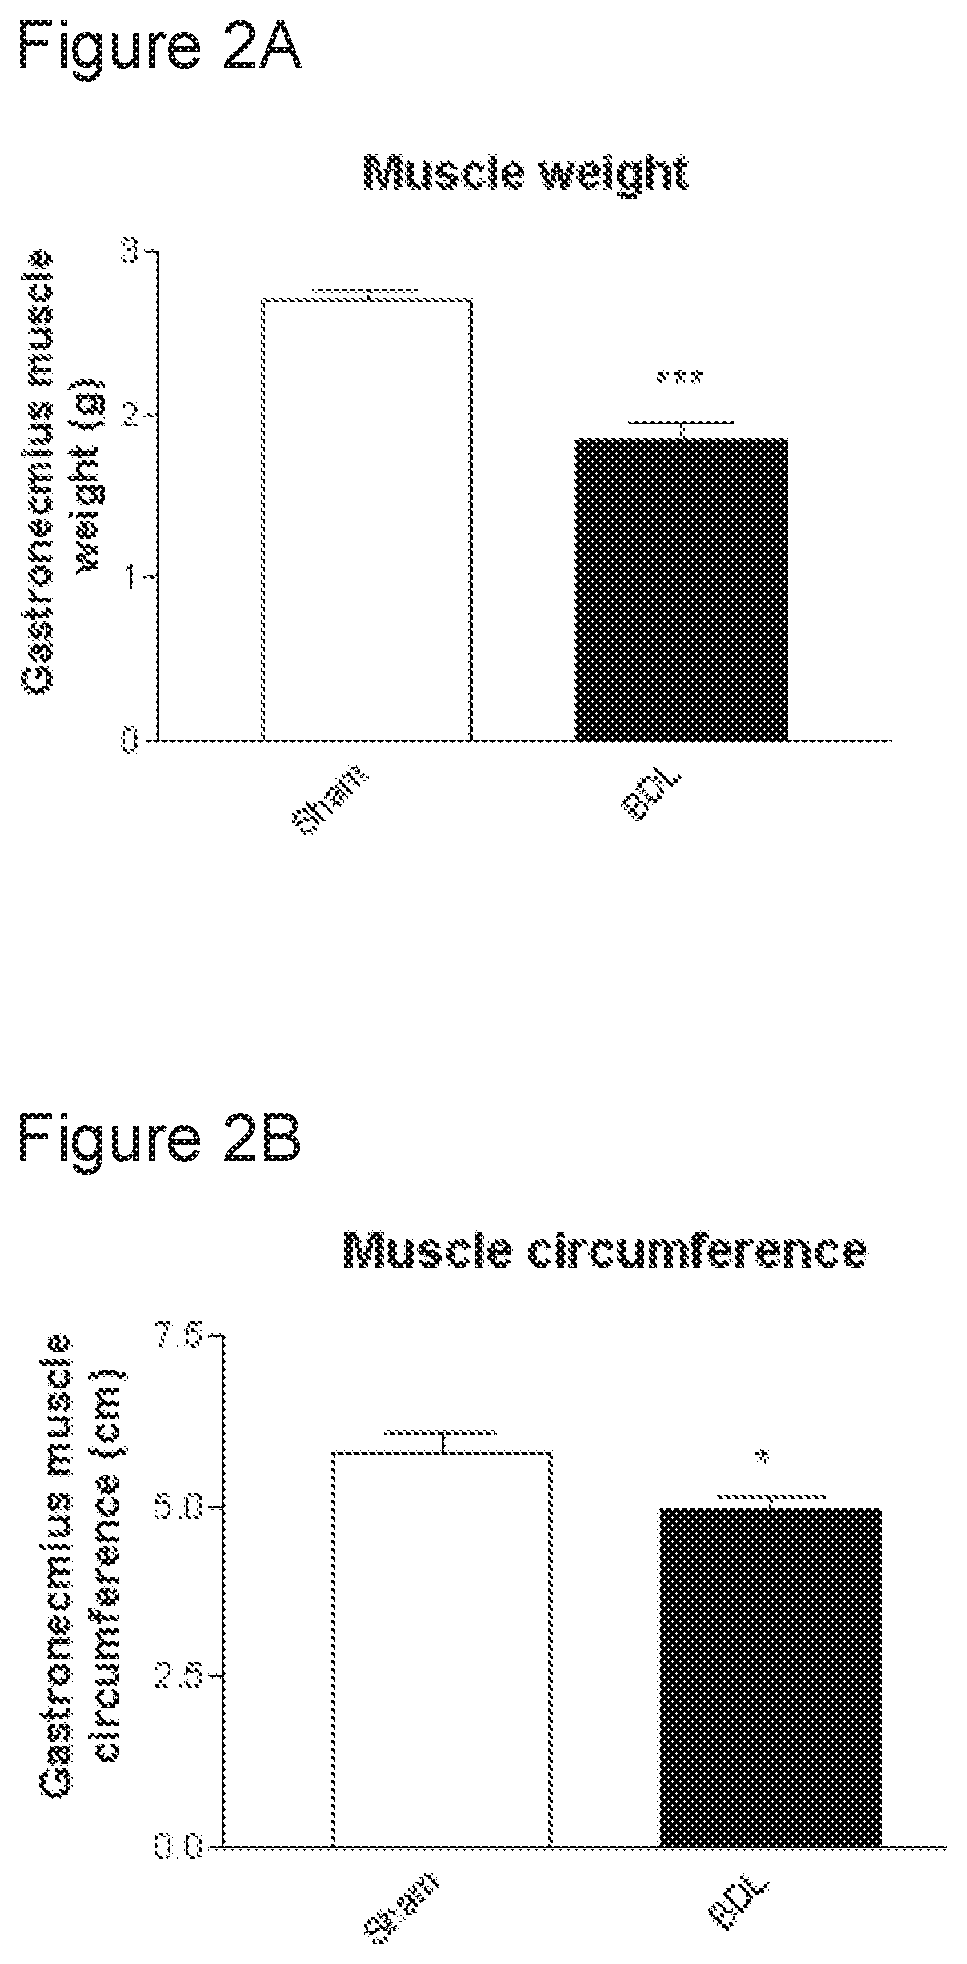 Treatment and prevention of muscle loss using L-ornithine in combination with at least one of phenylacetate and phenylbutyrate